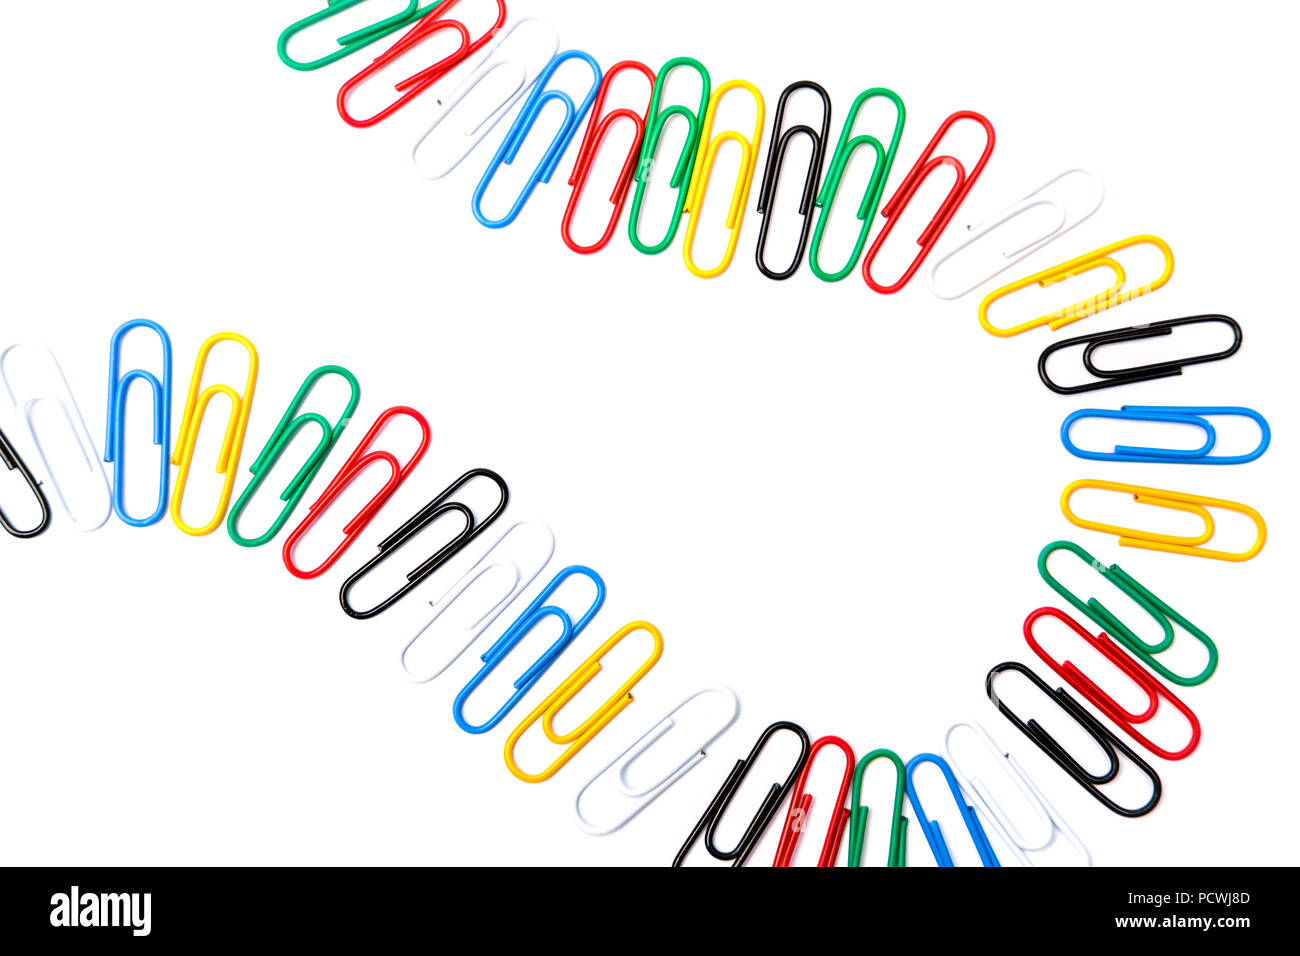 Curves or road made with colorful paper clips Stock Photo